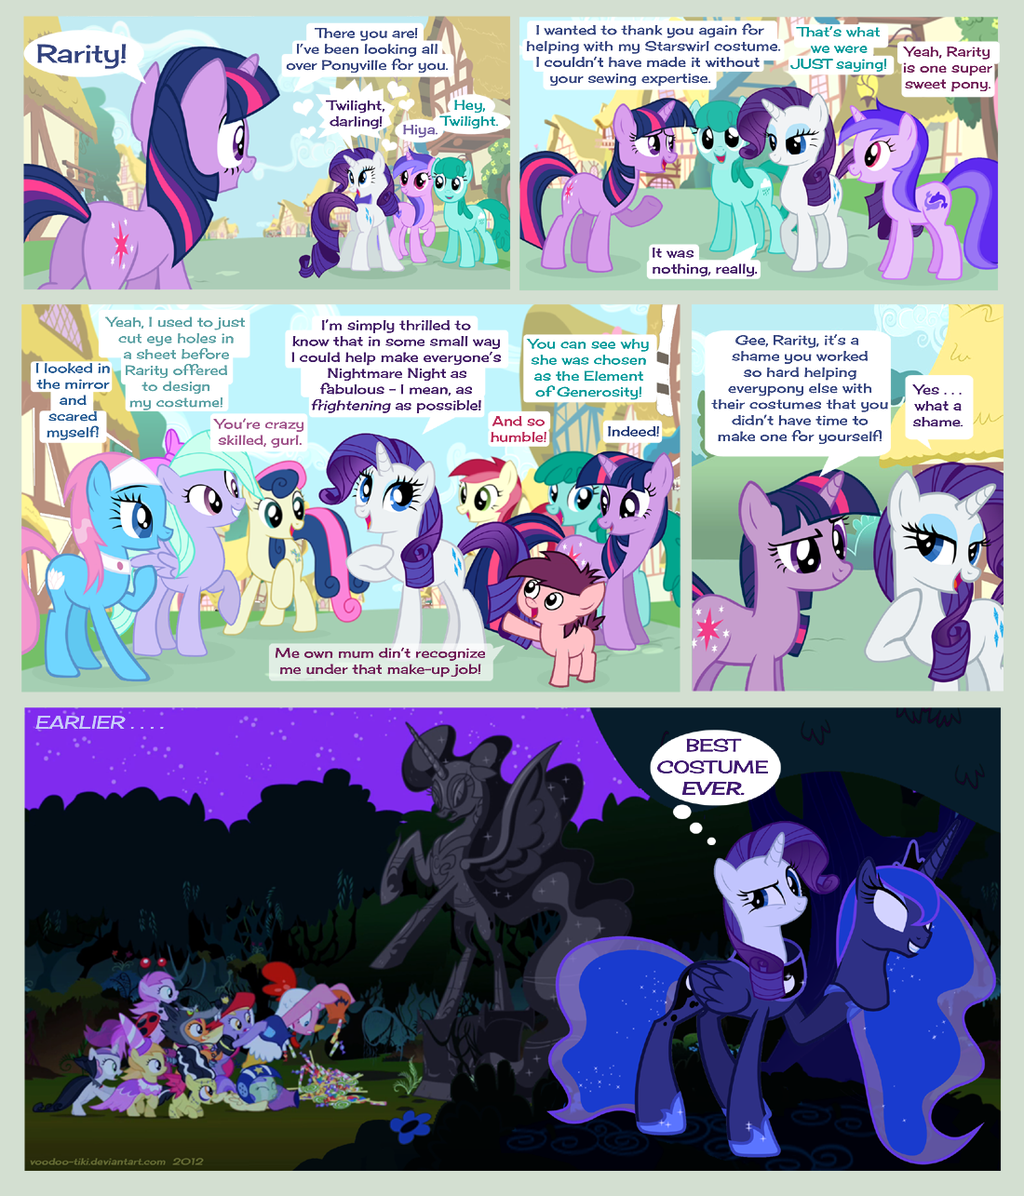 about last nightmare night       by vood